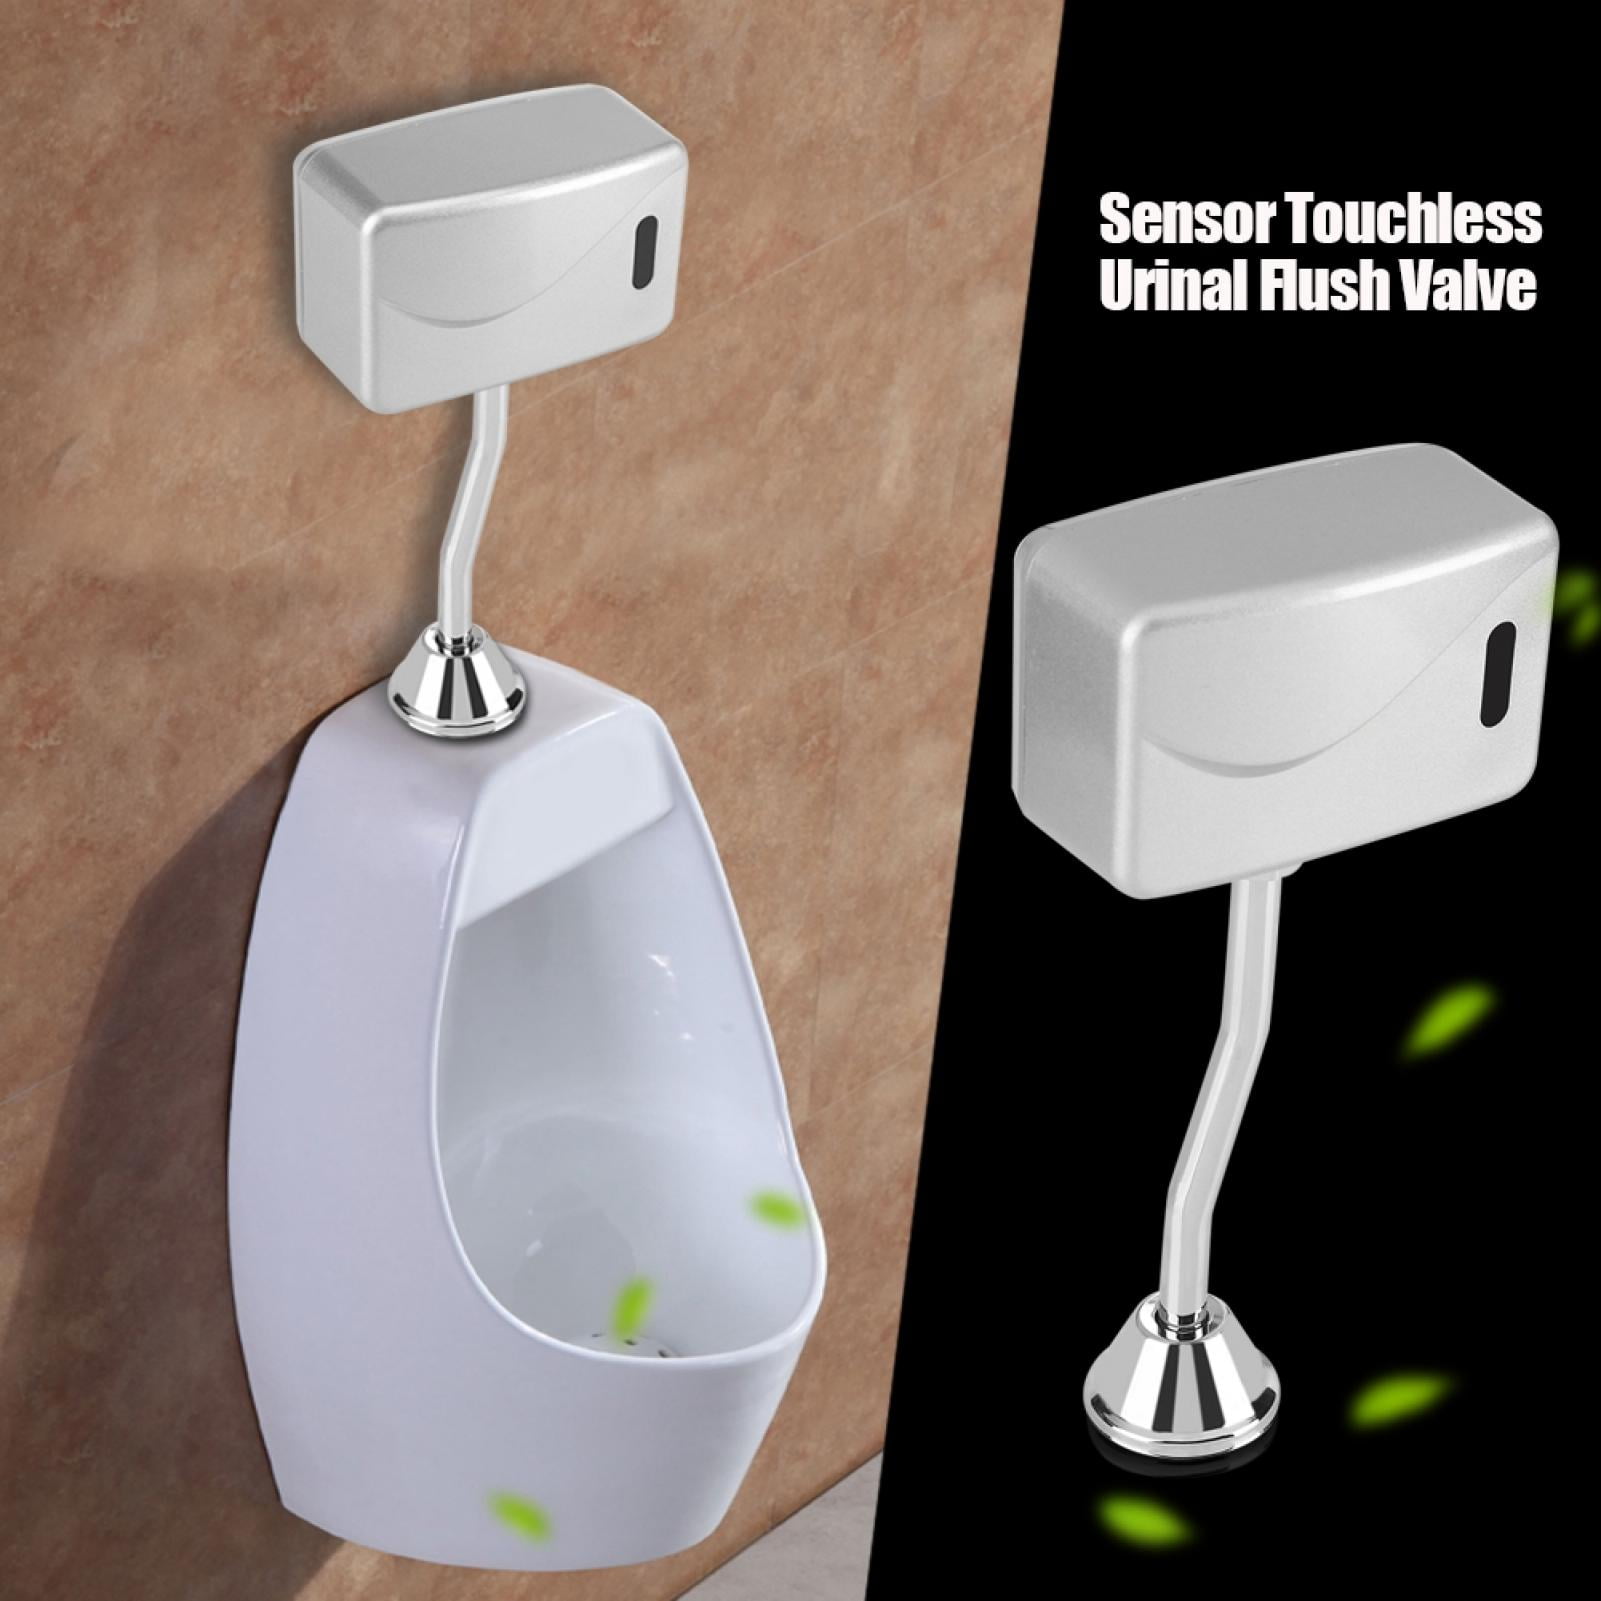 Flush Valve Protector fits automatic flush valves toilet and urinal